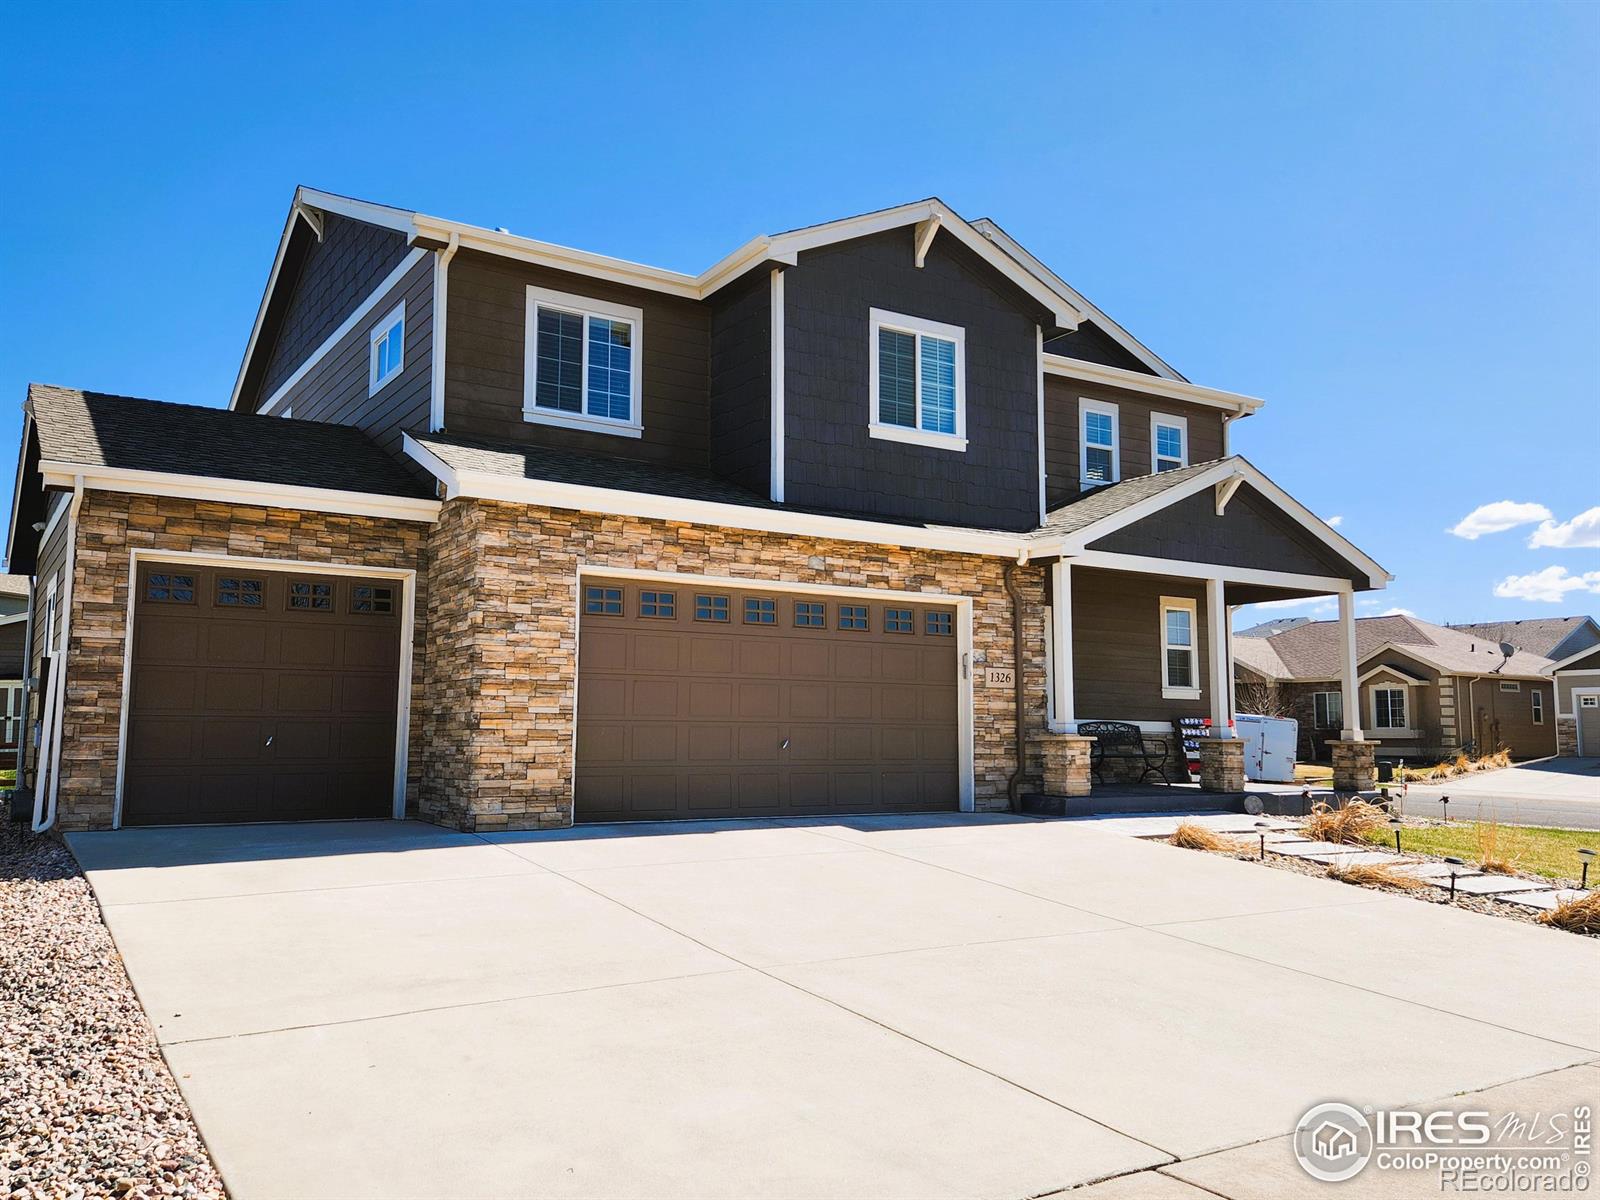 1326  63rd Avenue, greeley MLS: 4567891006488 Beds: 4 Baths: 4 Price: $539,900